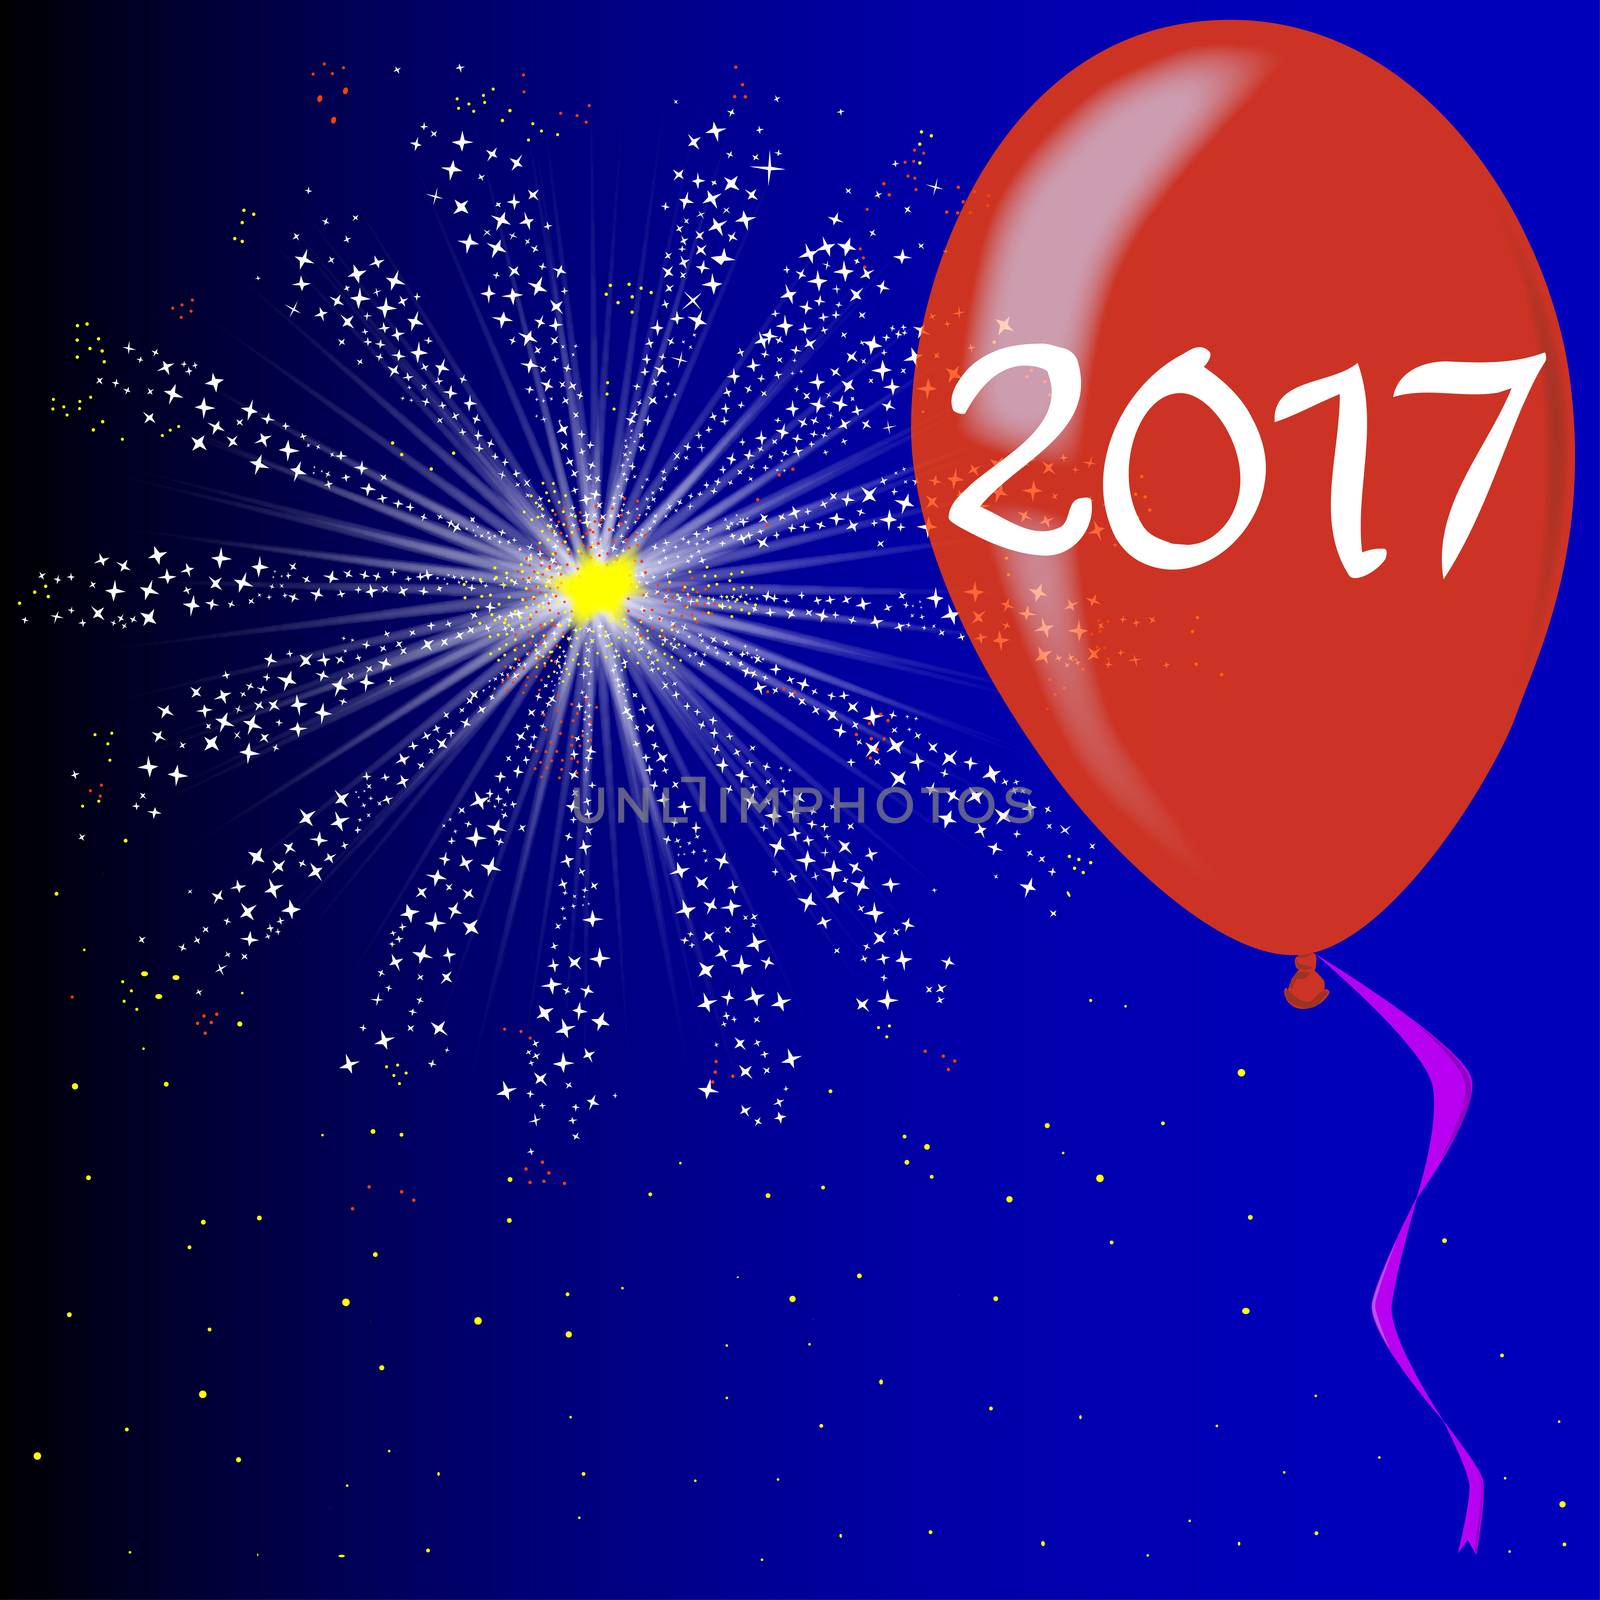 A flyaway red balloon with a skyrocket explosion with fallout and the text 2017